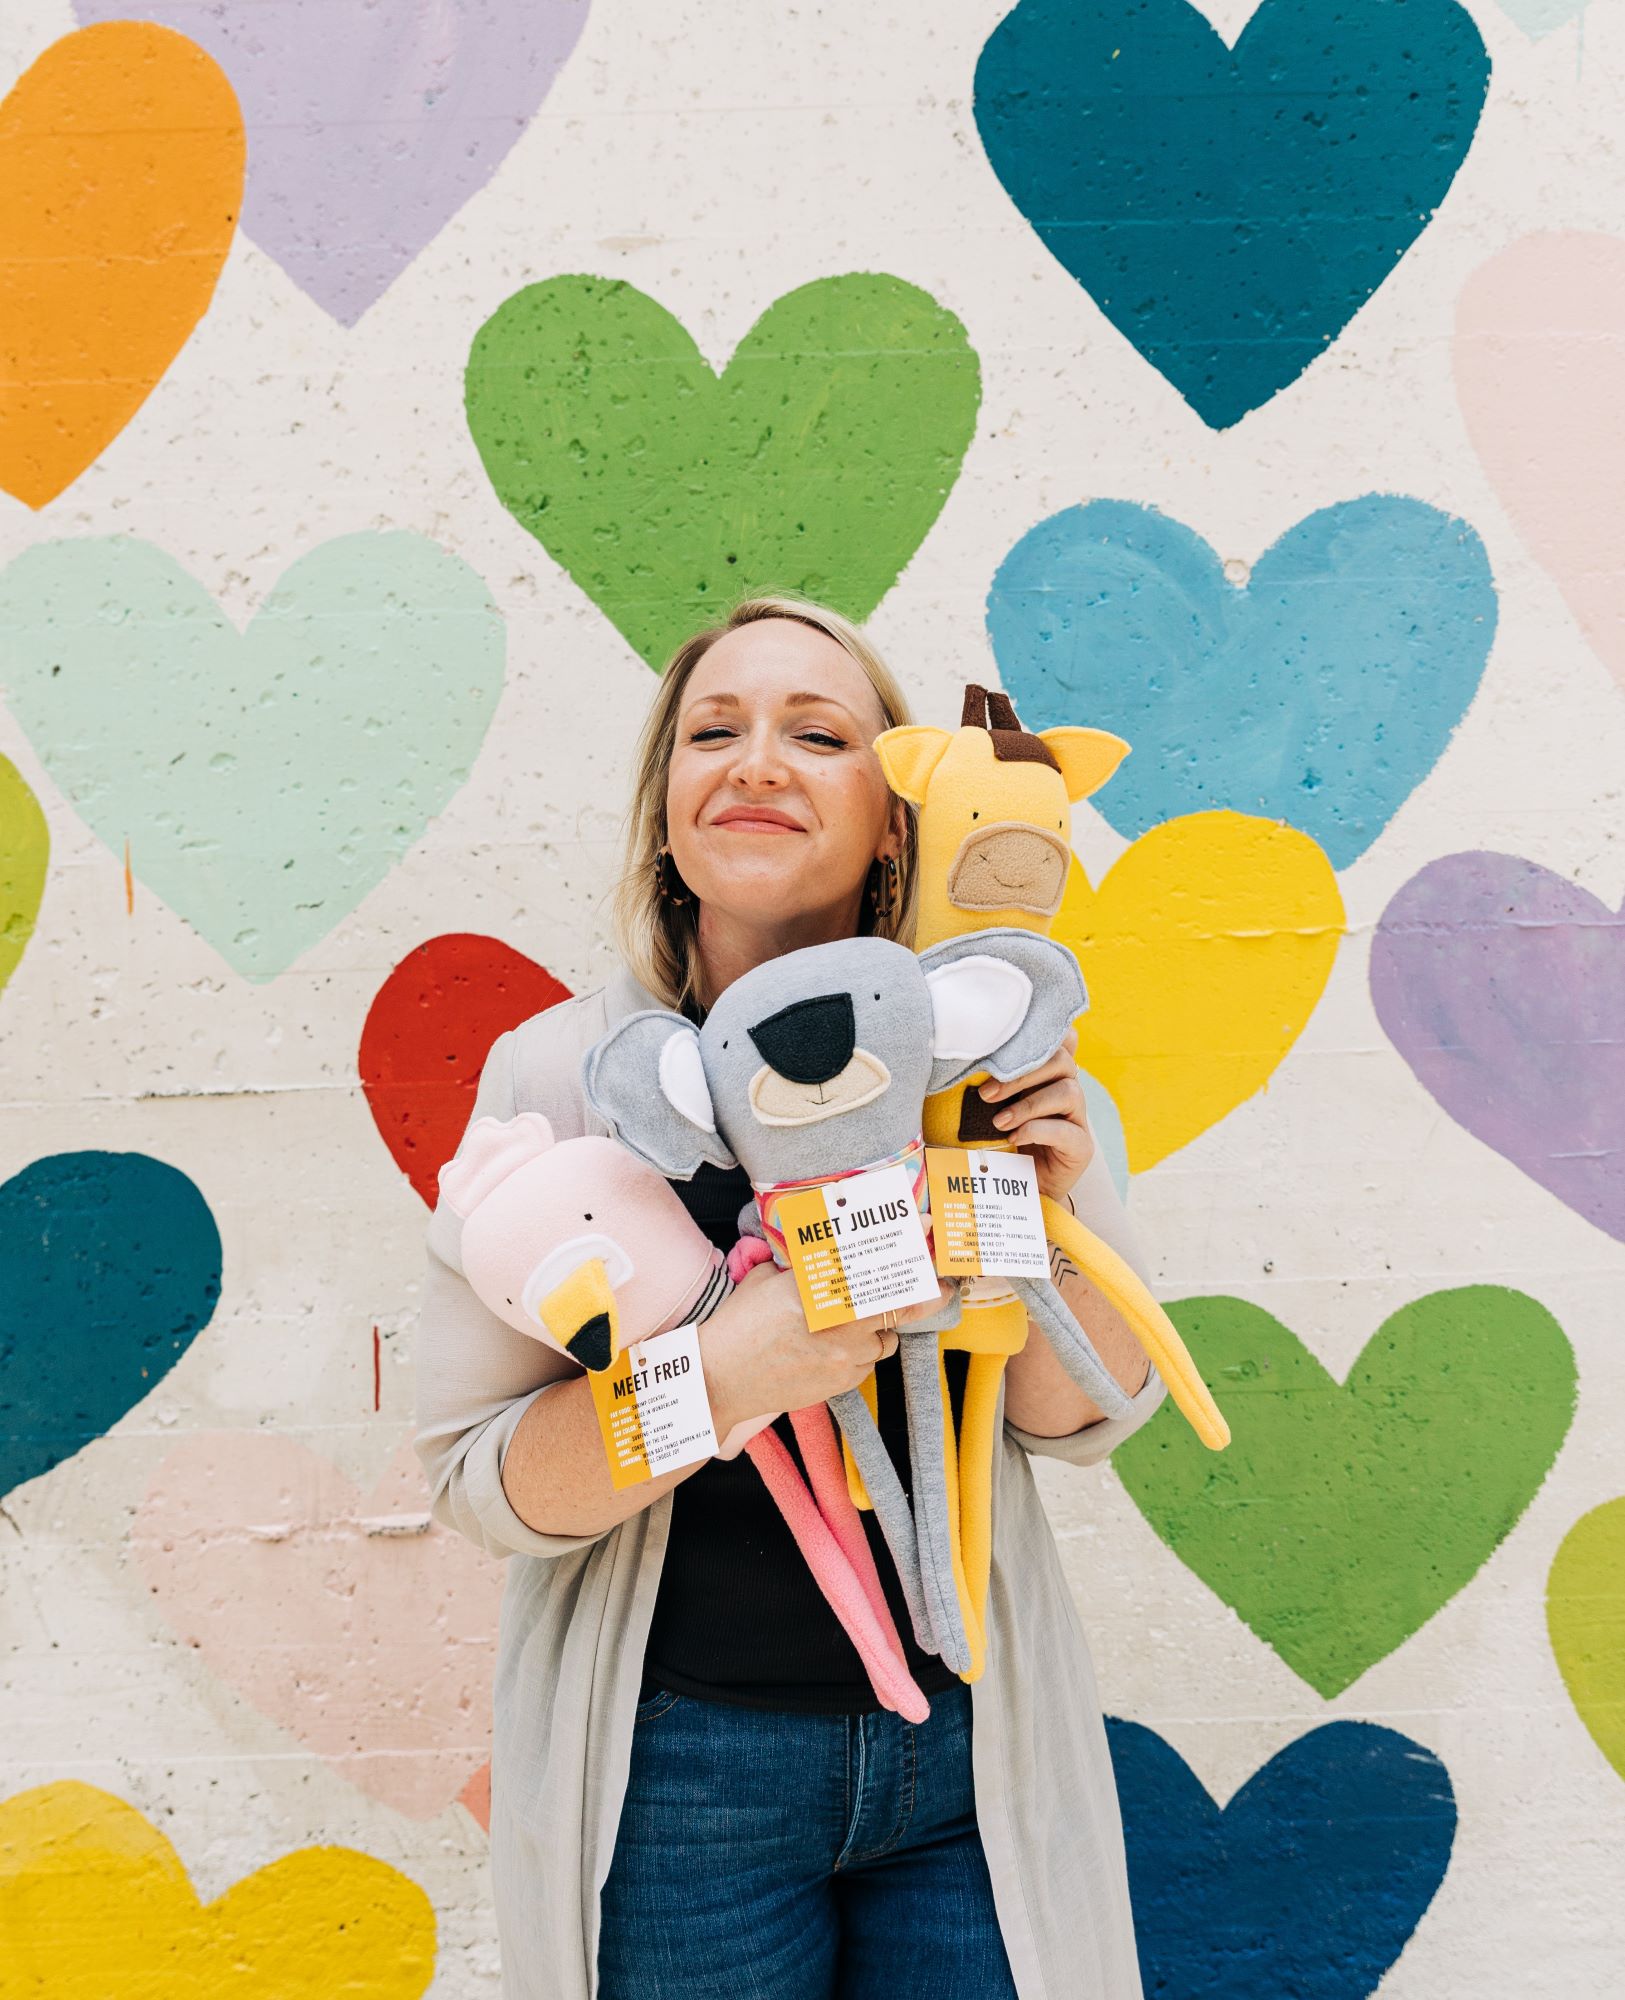 Photo of Kaylyn Van Camp with some of her creations on a background of colorful hearts